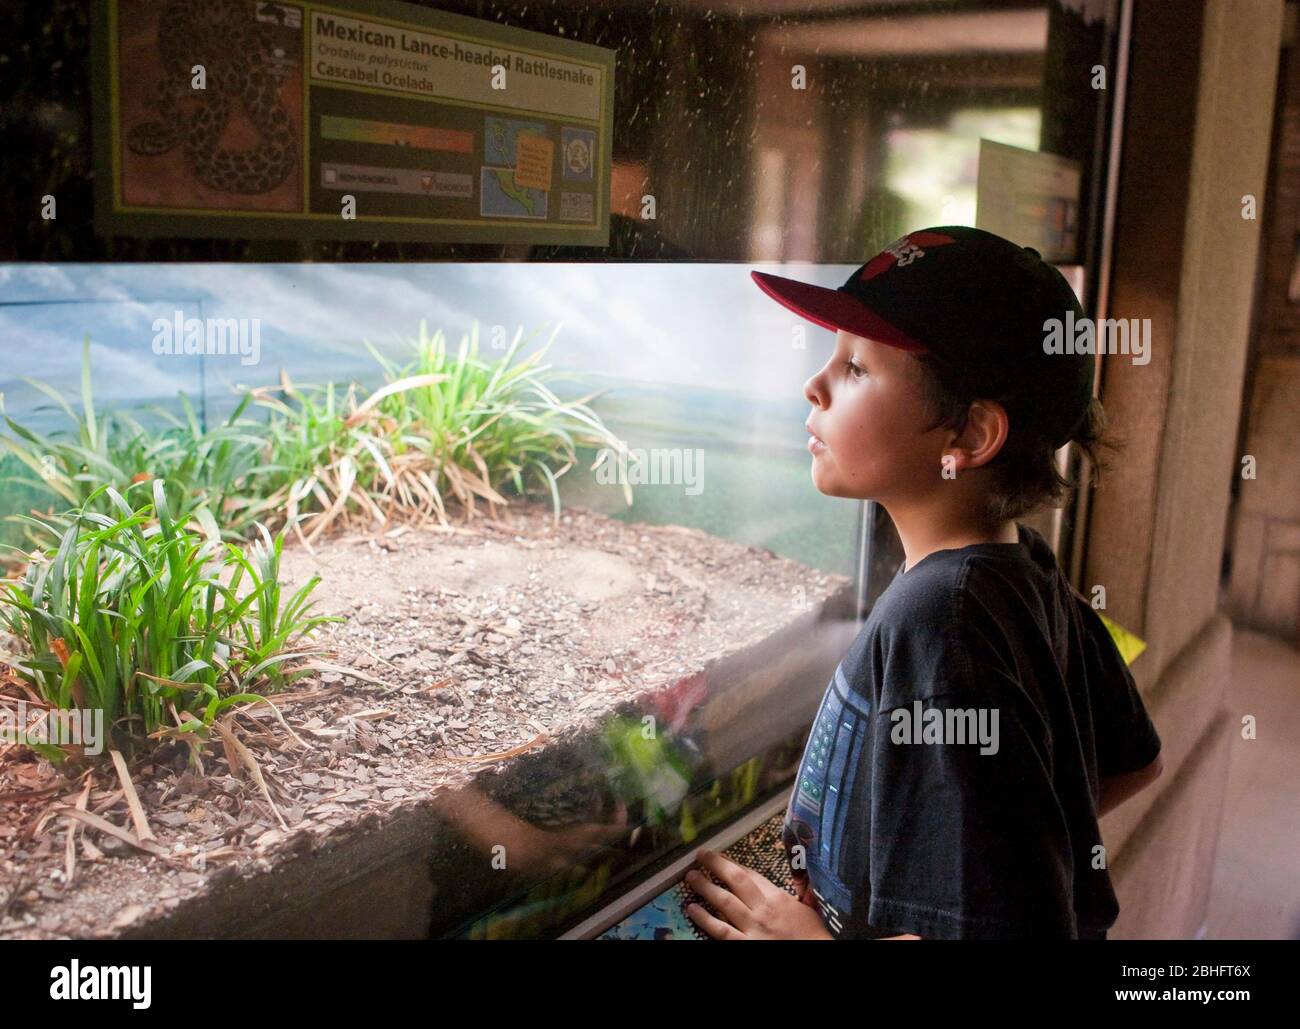 San Antonio Texas USA, January 12 2012: 8 year old Mexican-American boy peaks into glass enclosure with rattlesnake at the San Antonio Texas Zoo. Model Released © Marjorie Kamys Cotera/Daemmrich Photography Stock Photo